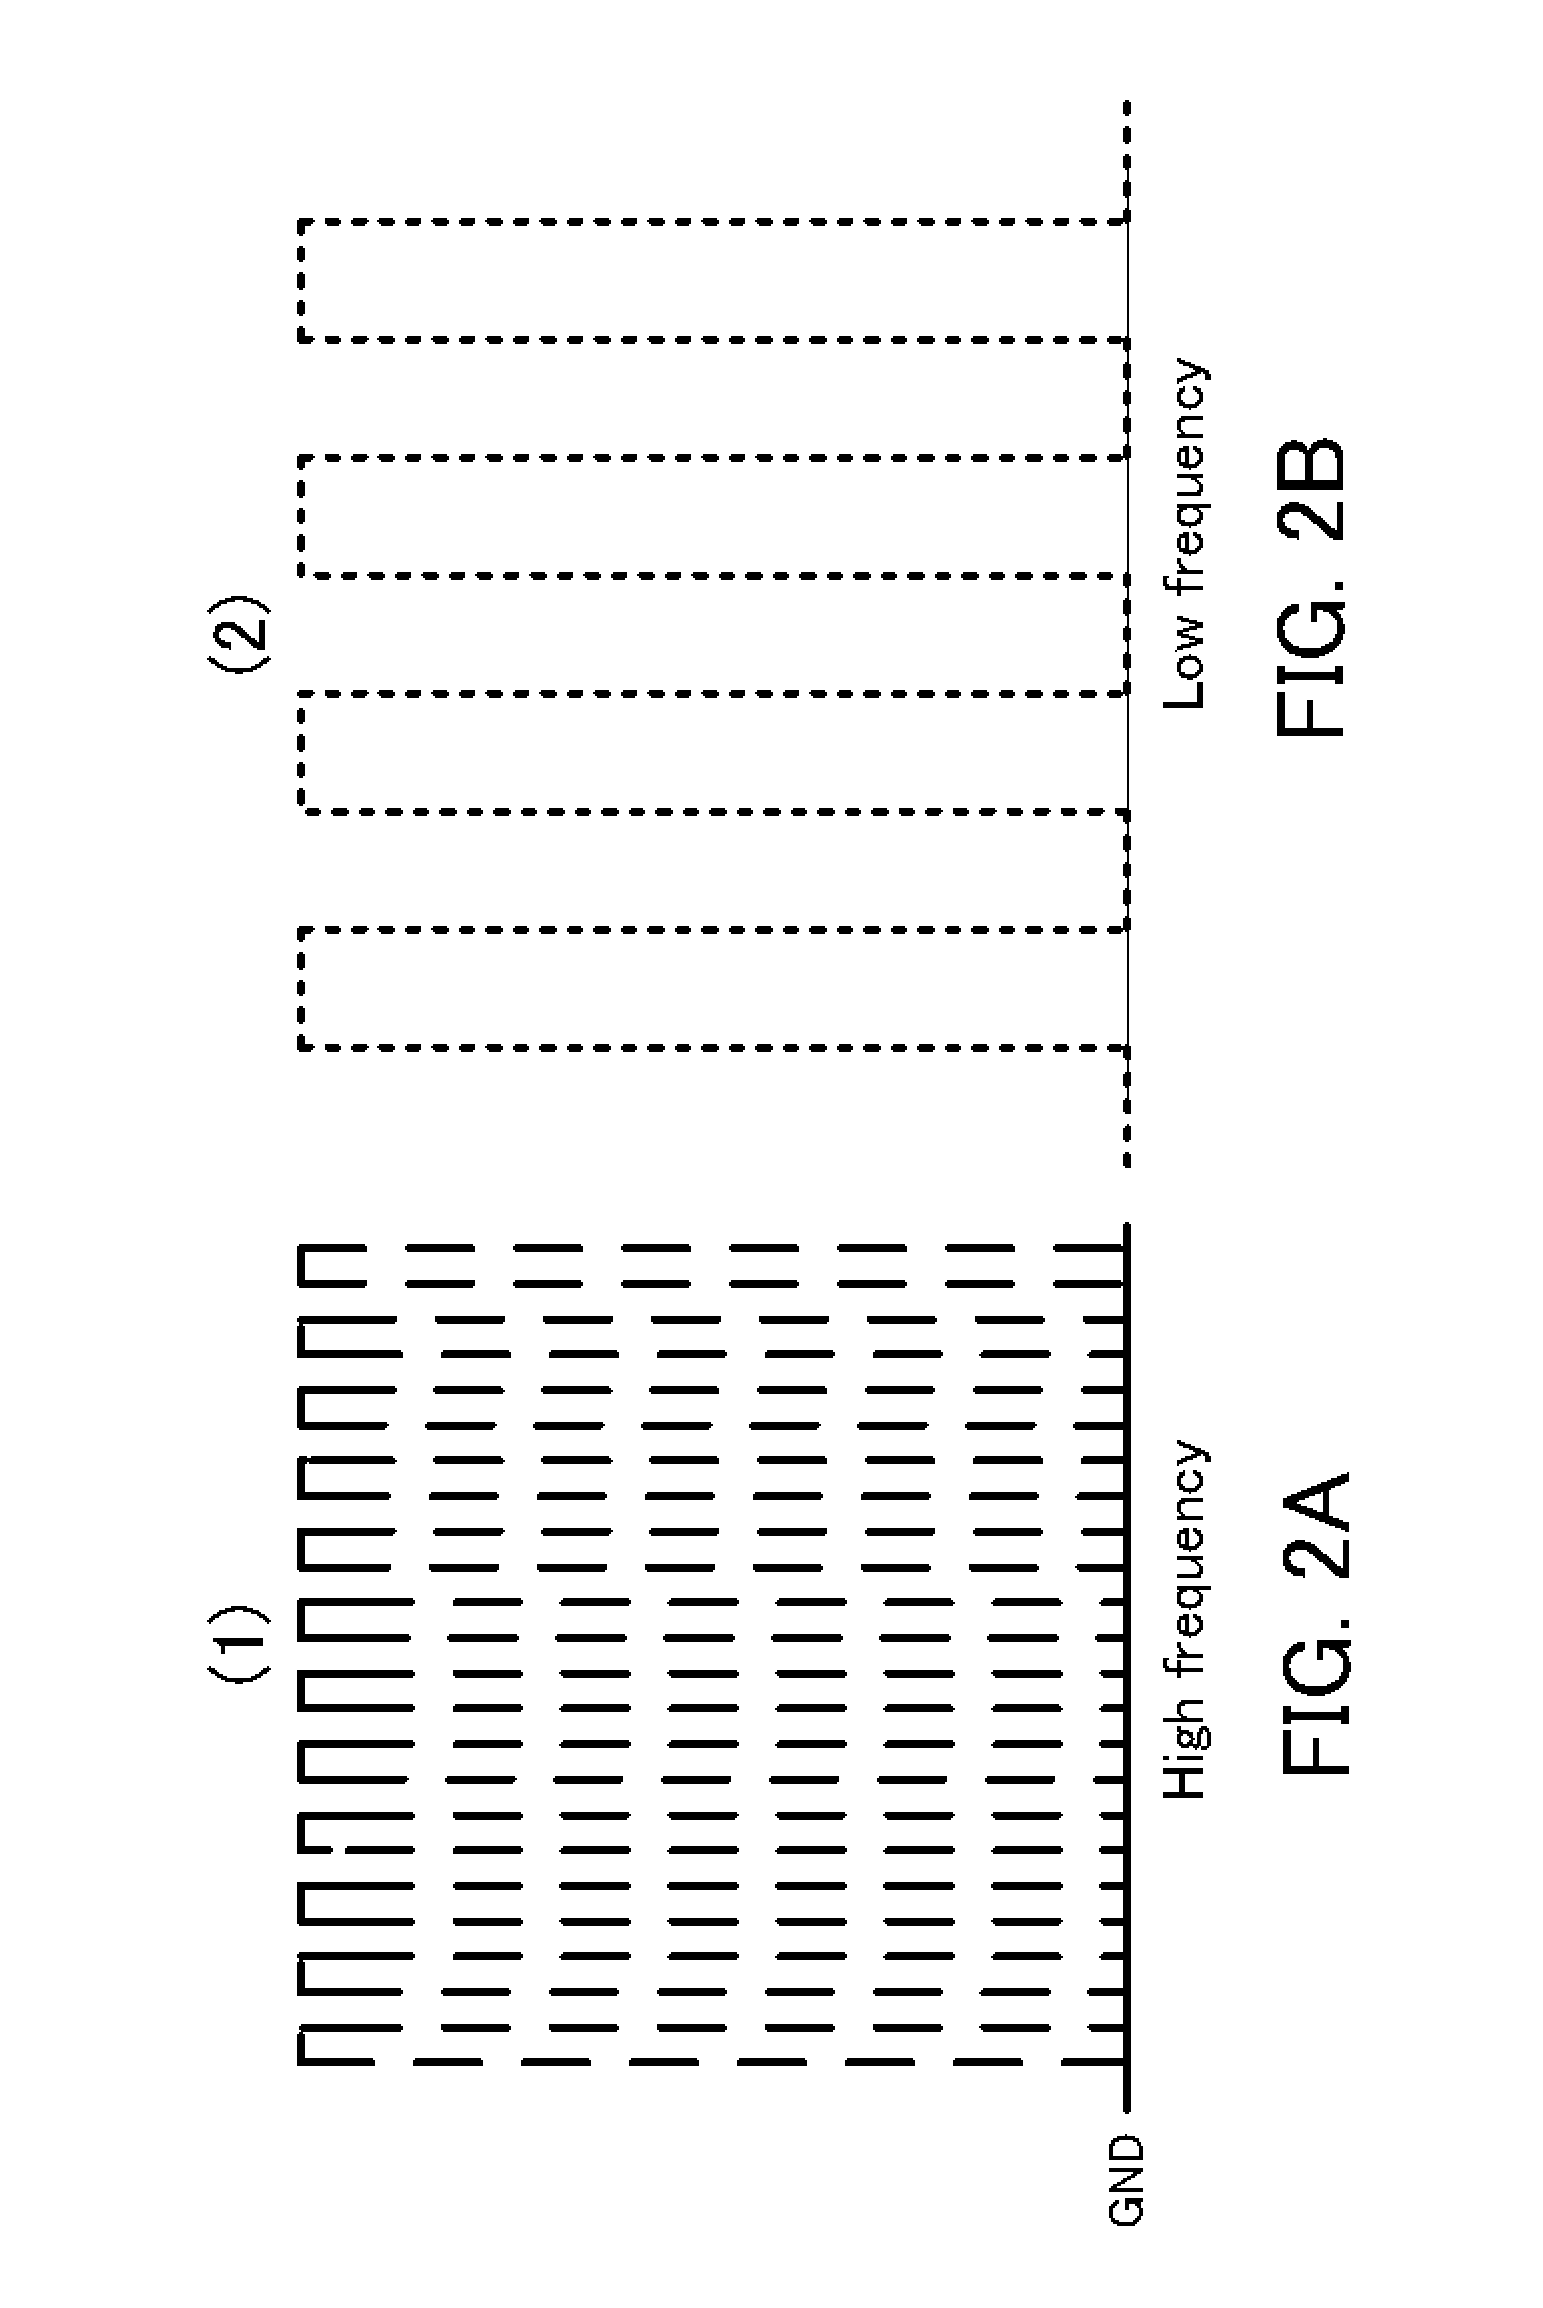 Frequency detection circuit